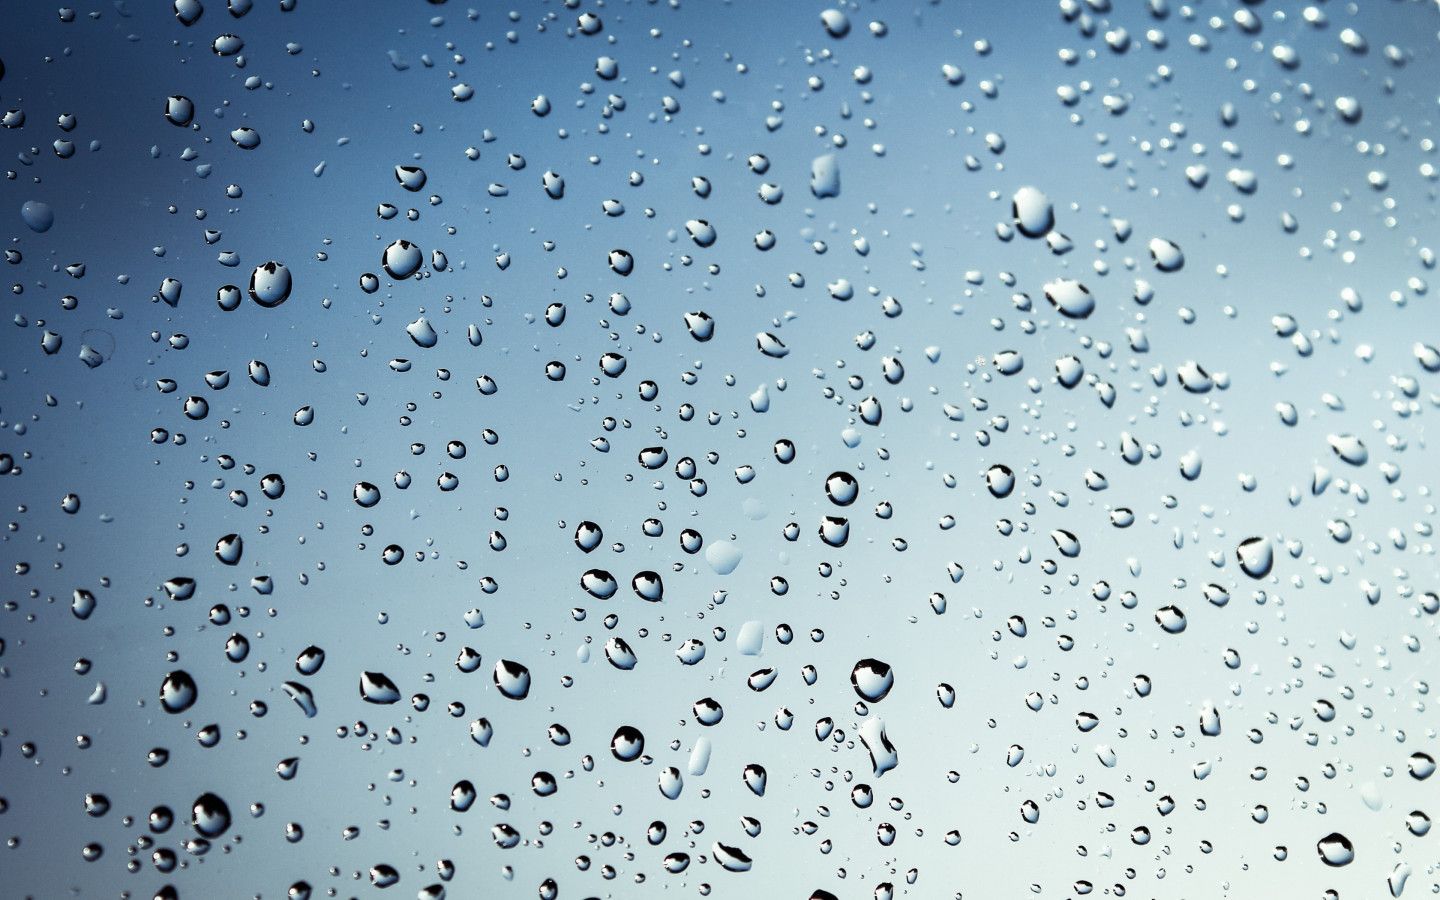 Raindrops on a window, with a blue sky in the background - 1440x900